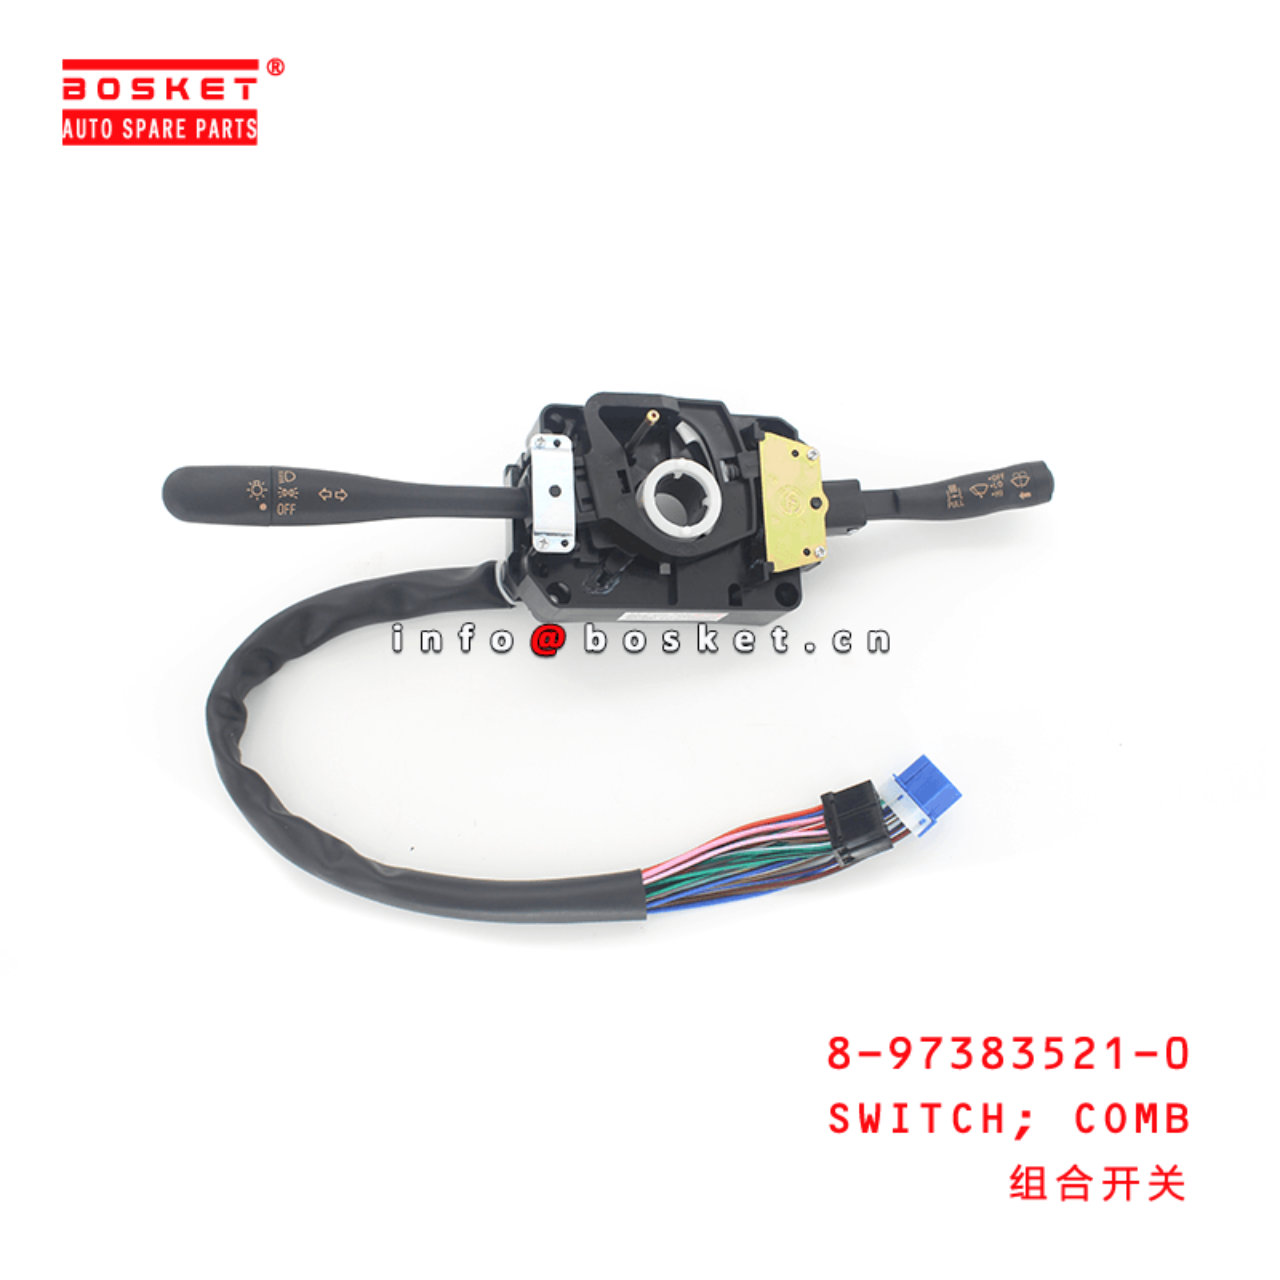 8-97383521-0 Combination Switch 897383521-0 Suitable for ISUZU NKR 